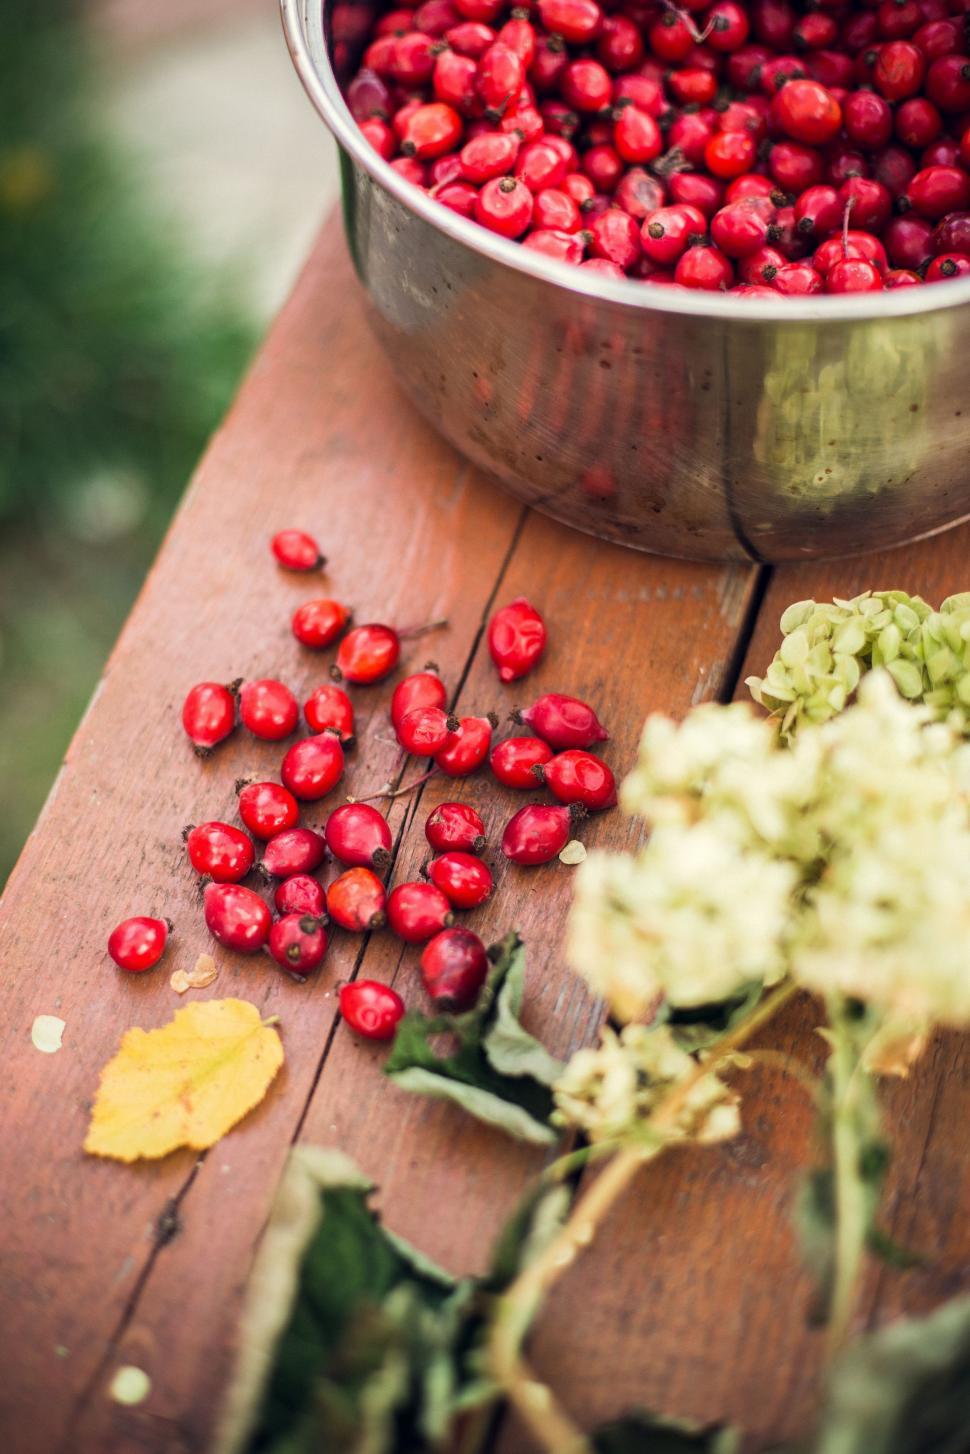 Free Image of Metal Bowl Filled With Red Berries and Green Leaves 